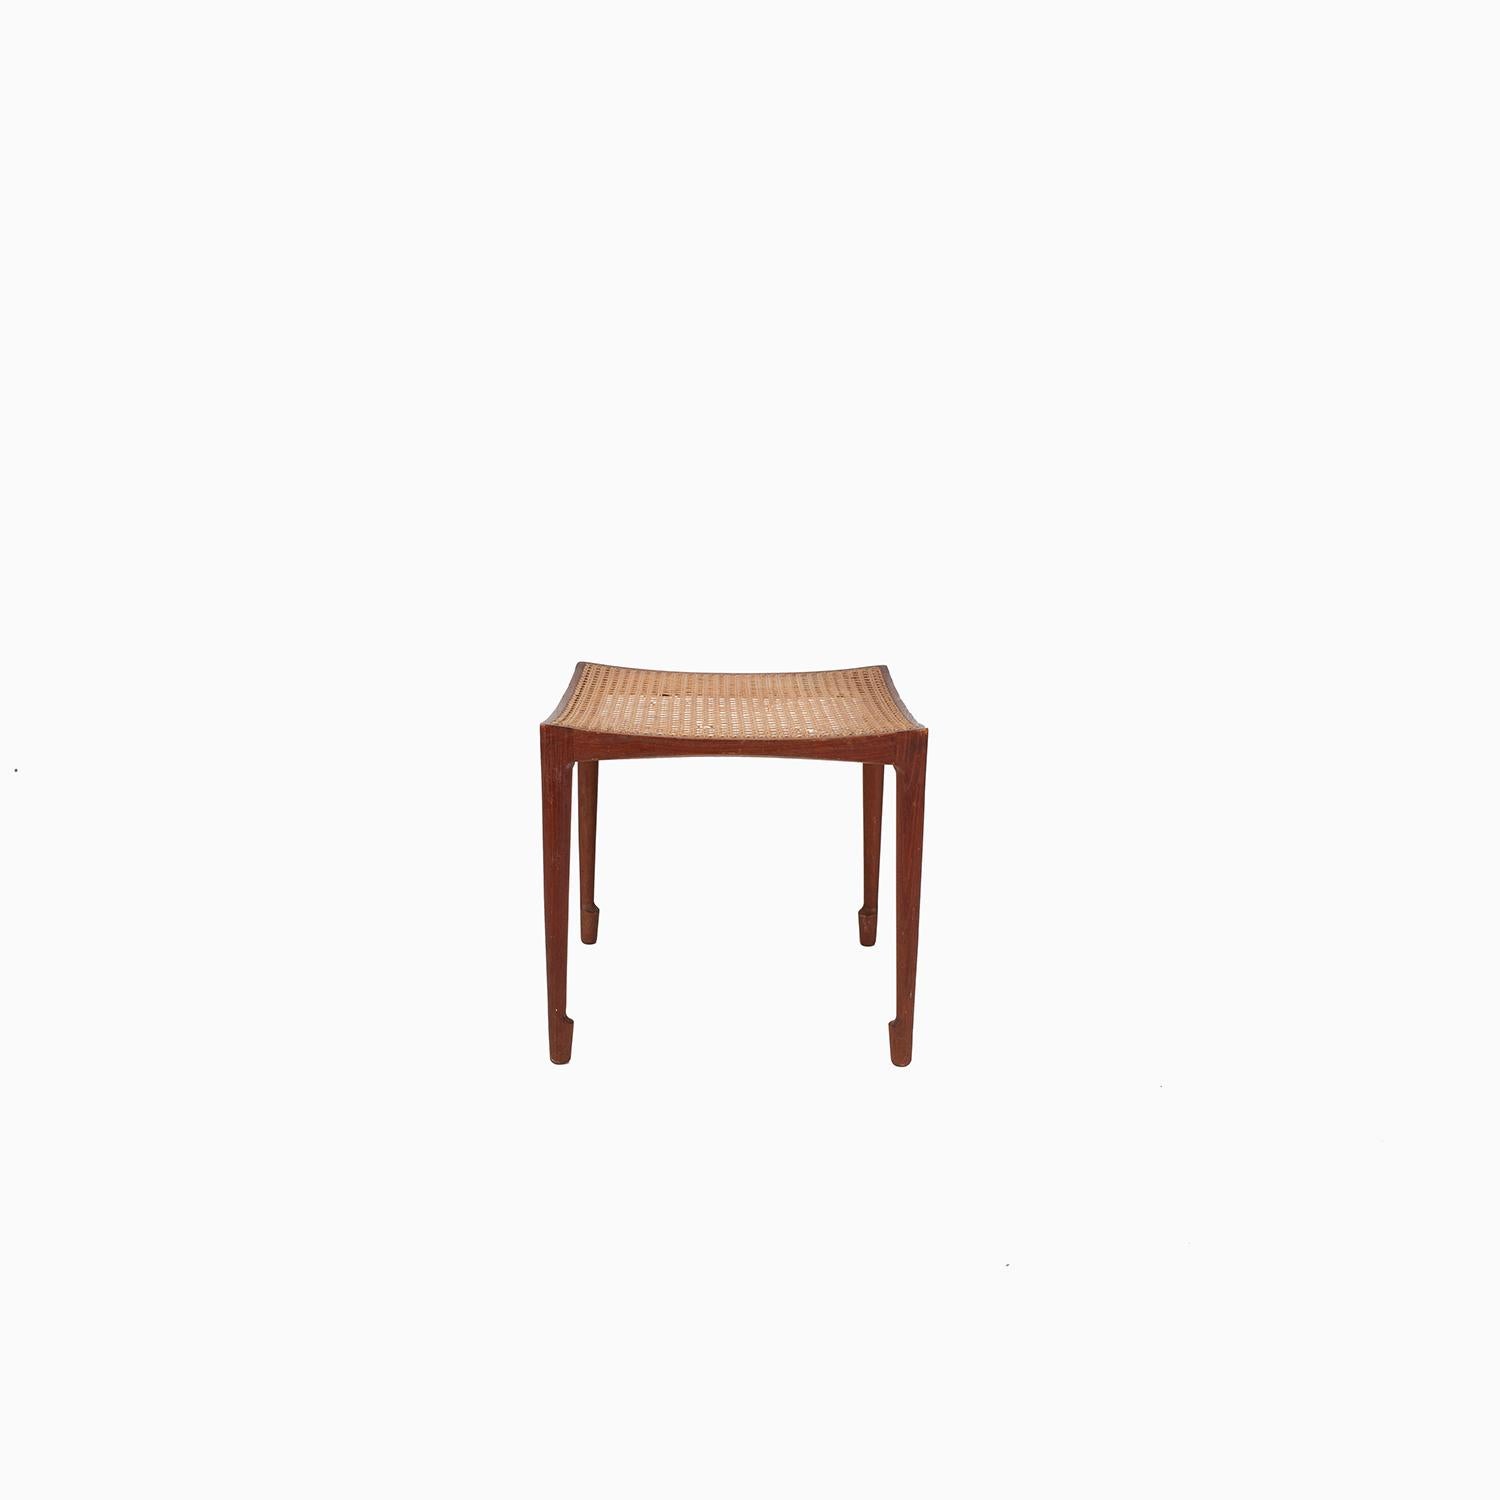 An elegantly designed teak and cane stool by Bernt Petersen for Worts Mobler. Some loss to the caning.

Professional, skilled furniture restoration is an integral part of what we do every day. Our goal 
is to provide beautiful, functional furniture